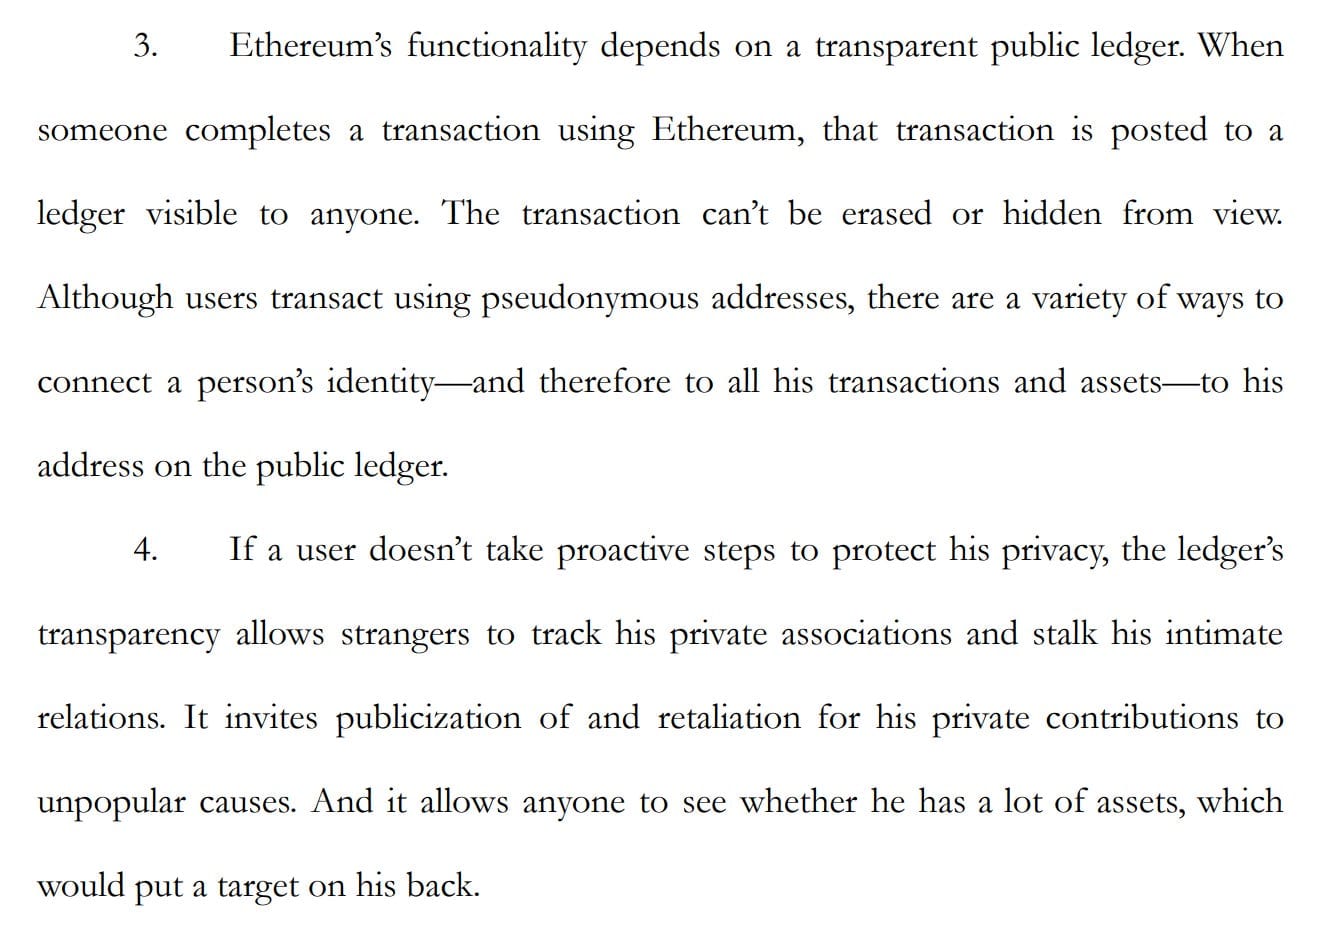 3. Ethereum's functionality depends on a transparent public ledger. When someone completes a transaction using Ethereum, that transaction is posted to a ledger visible to anyone. The transaction can't be erased or hidden from view. Although users transact using pseudonymous addresses, there are a variety of ways to connect a person's identity—and therefore to all his transactions and assets—to his address on the public ledger. 4. If a user doesn't take proactive steps to protect his privacy, the ledger's transparency allows strangers to track his private associations and stalk his intimate relations. It invites publicization of and retaliation for his private contributions to unpopular causes. And it allows anyone to see whether he has a lot of assets, which would put a target on his back.